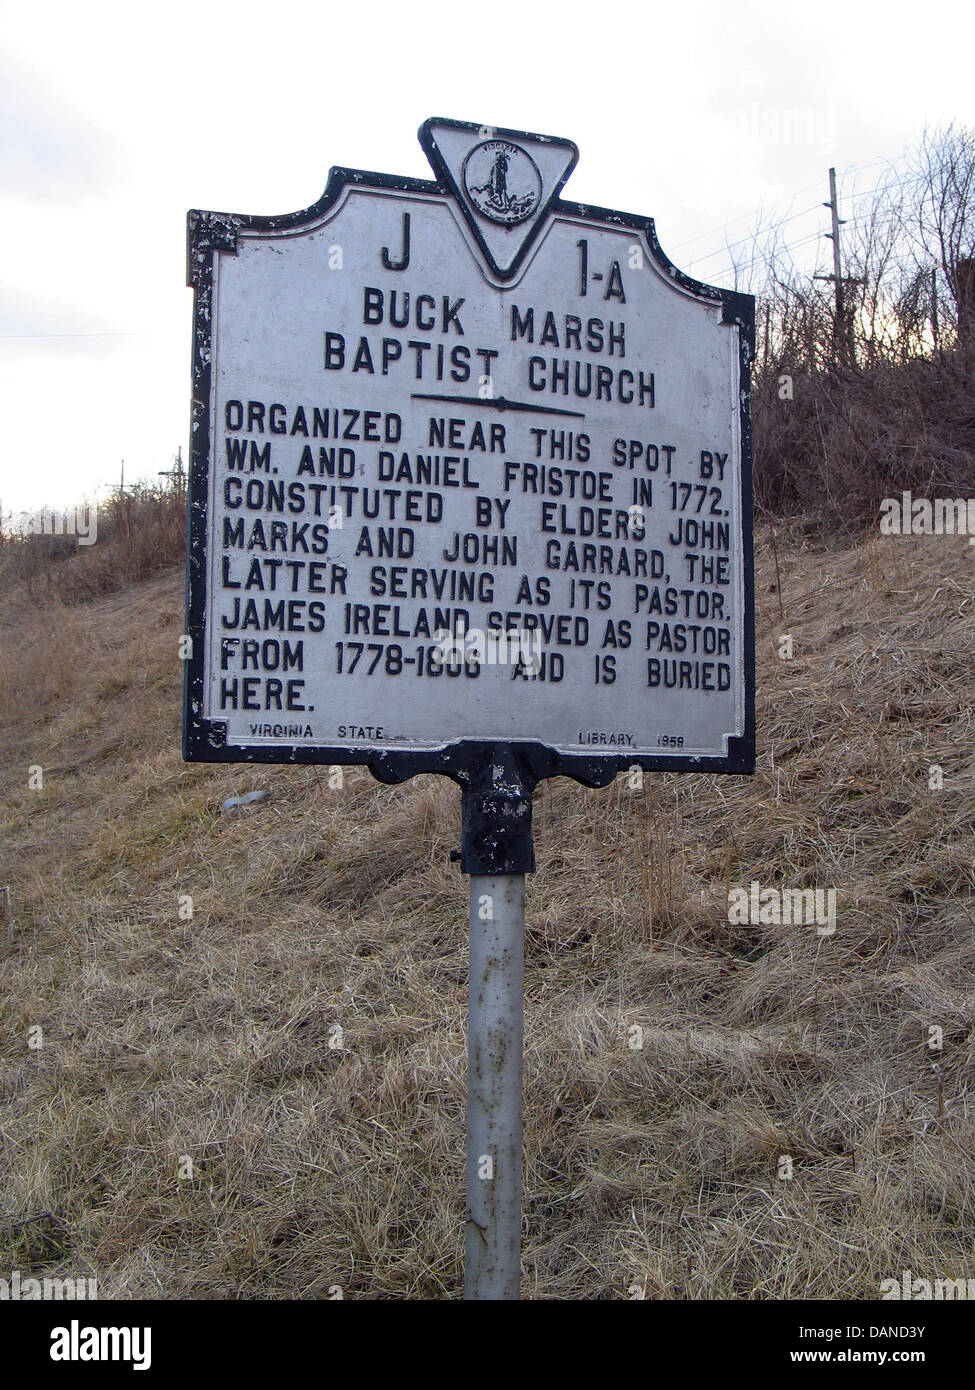 BUCK MARSH BAPTIST CHURCH Organized near this spot by Wm. and Daniel Fristoe in 1772. Constituted by Elders John Marks and John Garrard, the latter serving as its pastor. Jame Ireland served as pastor from 1778-1806 and is buried here. Virginia State Library, 1959 Stock Photo